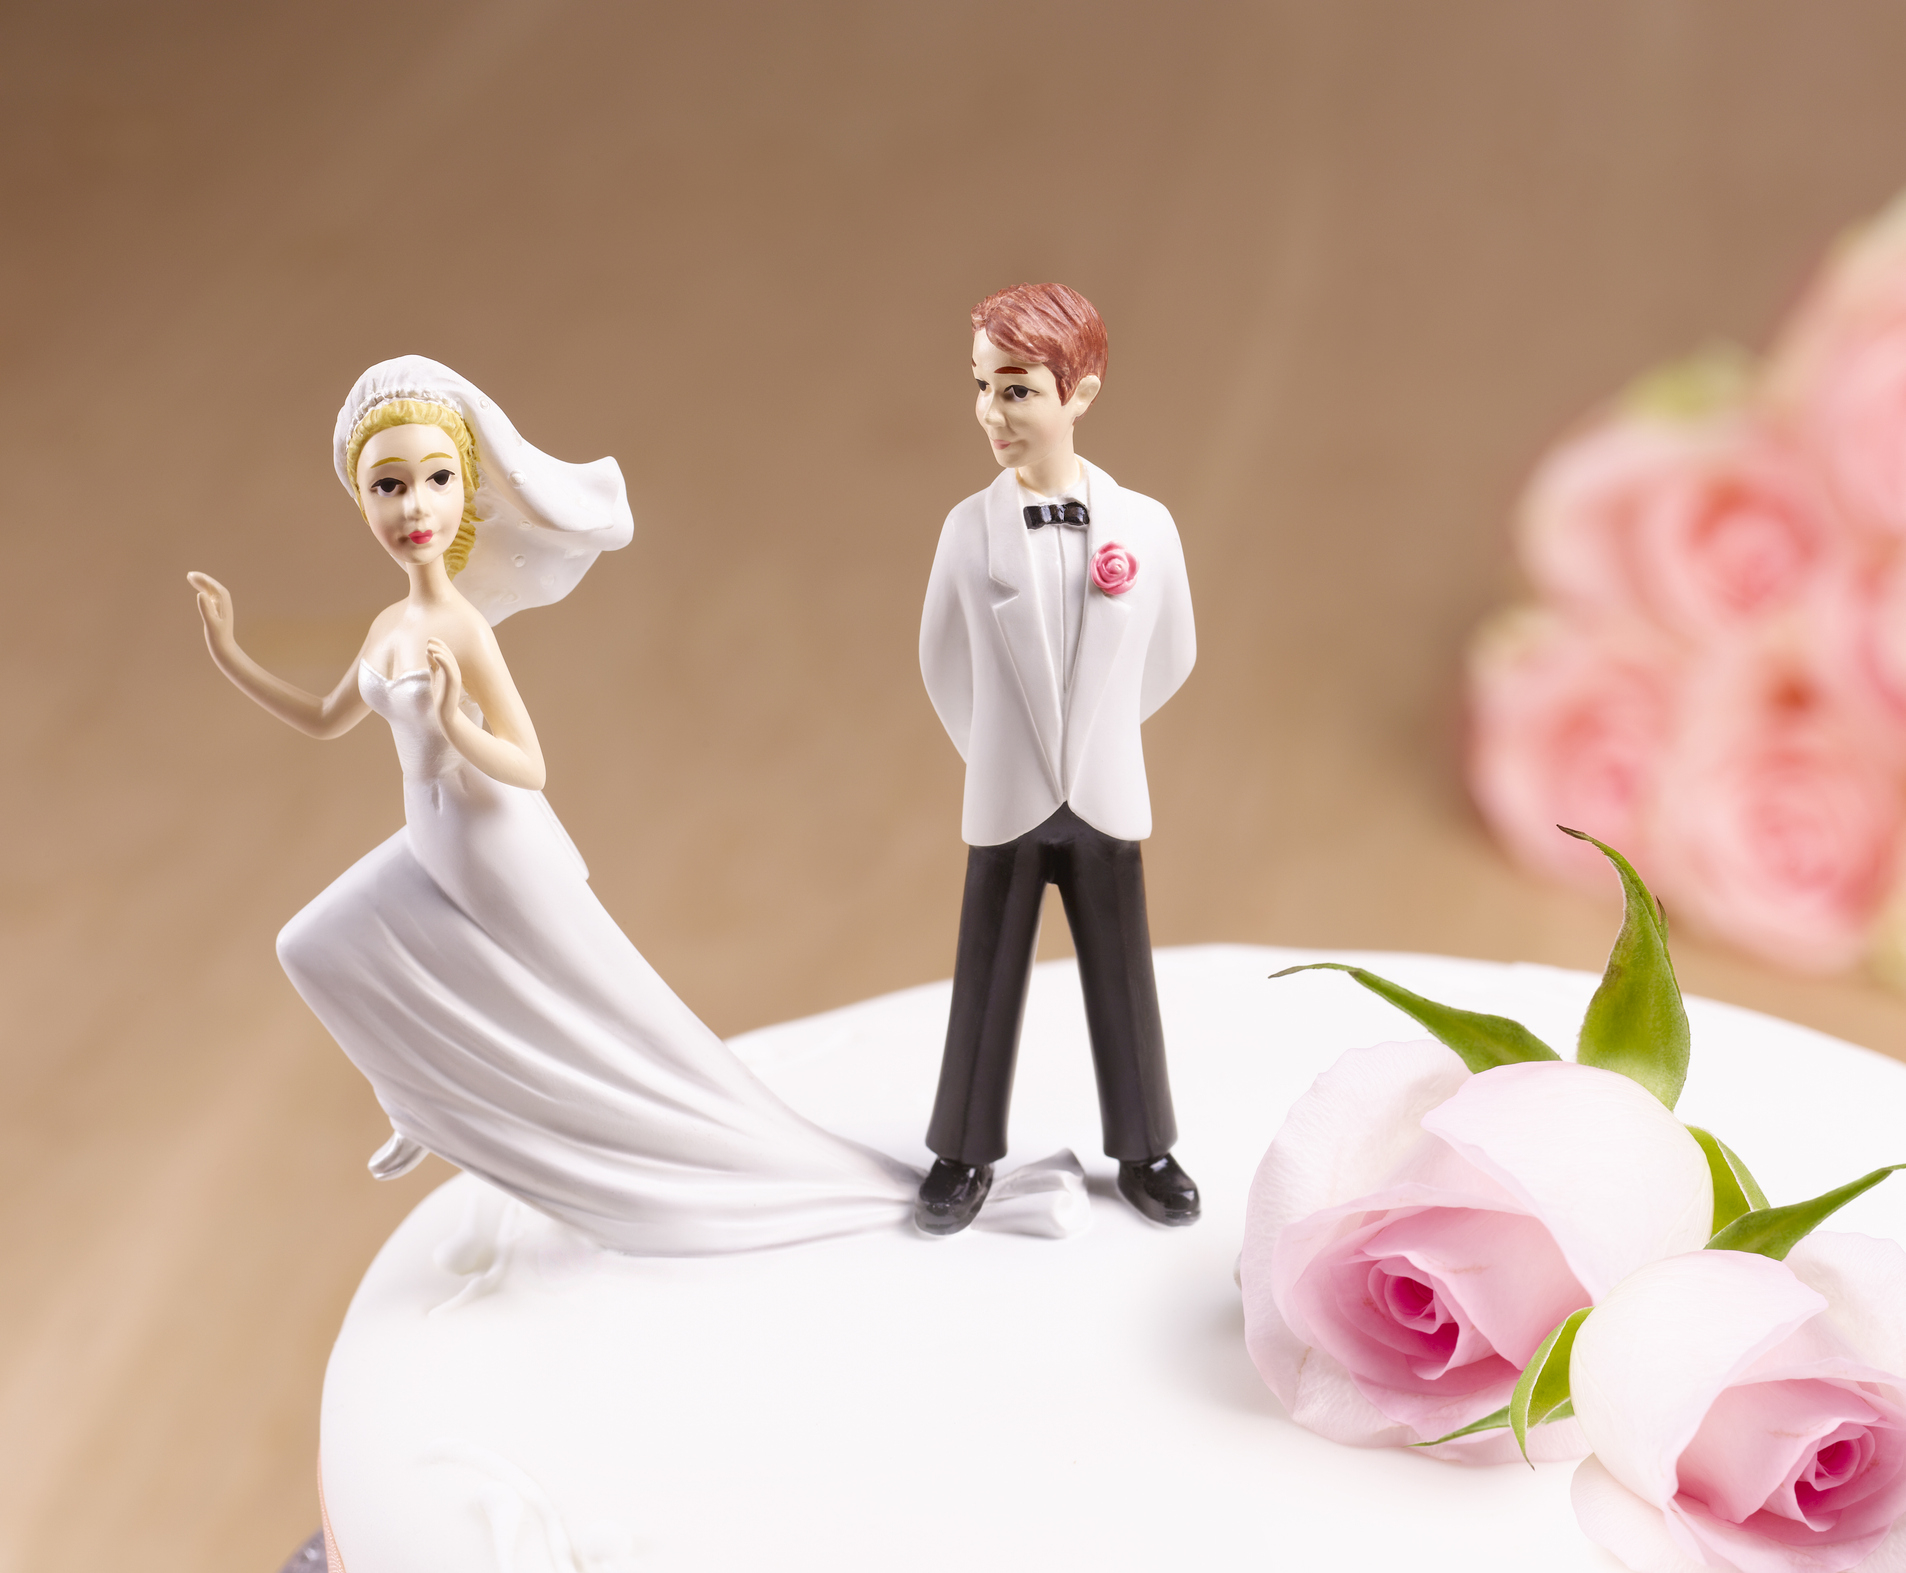 Bride and groom figurines on a wedding cake with pink roses